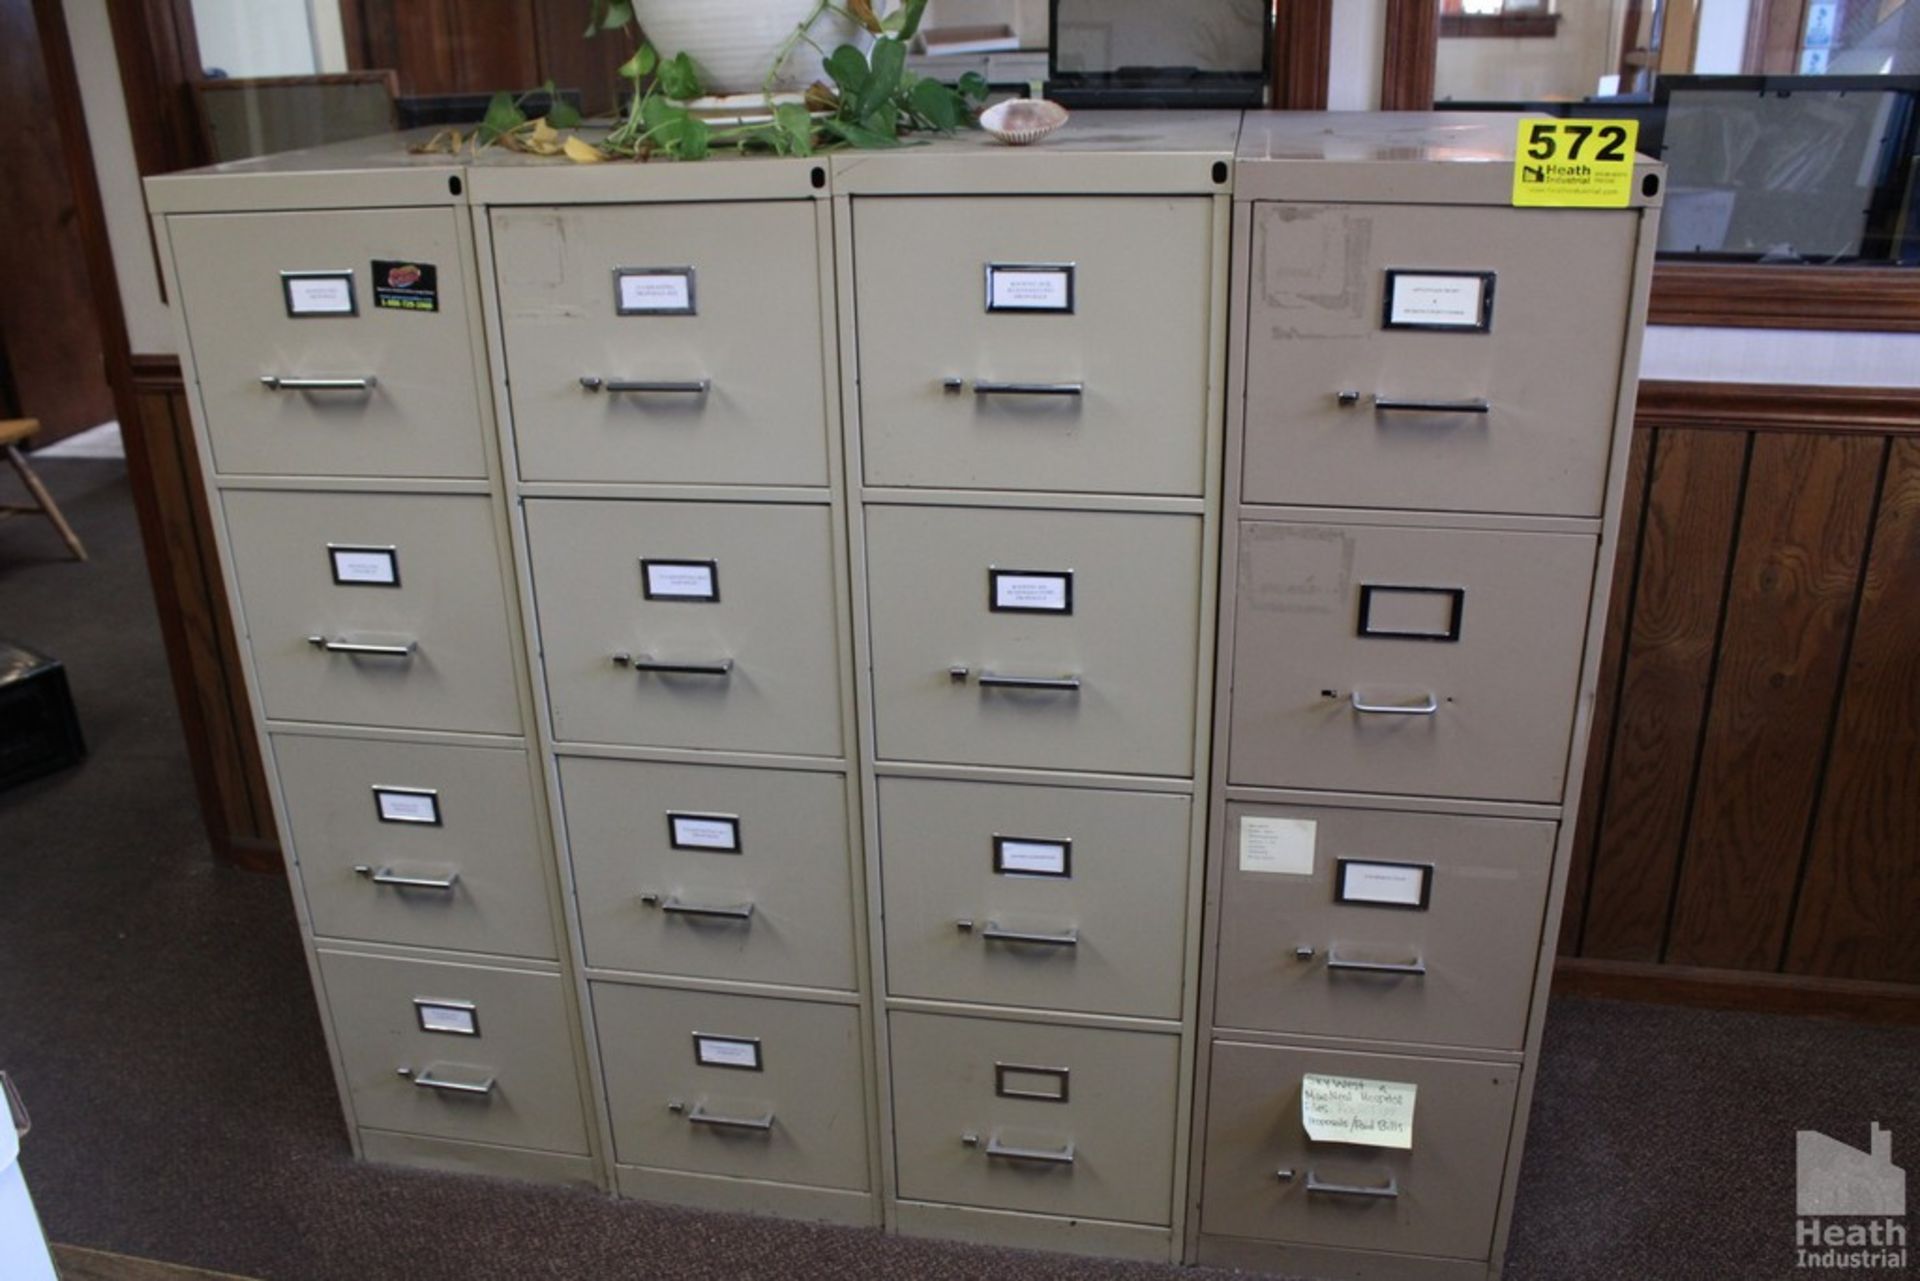 (5) FOUR DRAWER FILE CABINETS, 15" X 26" X 52"